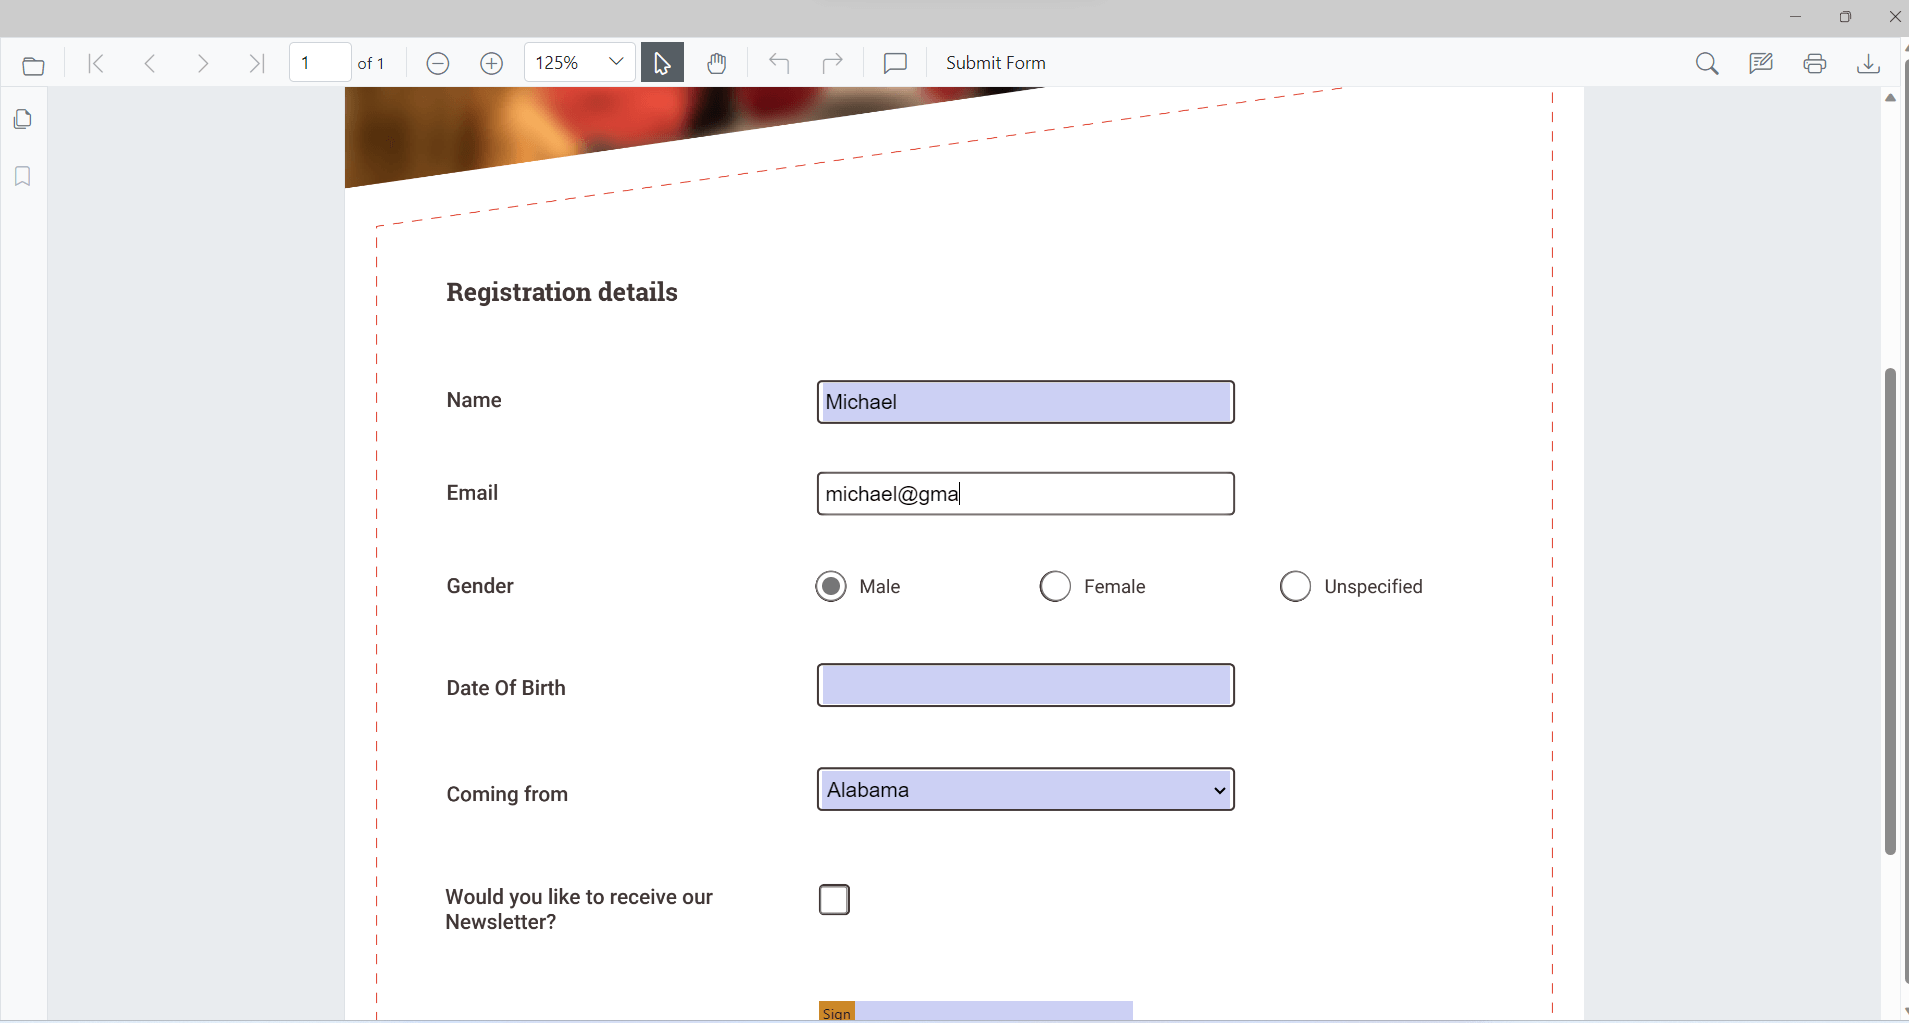 Filling PDF forms on Windows devices